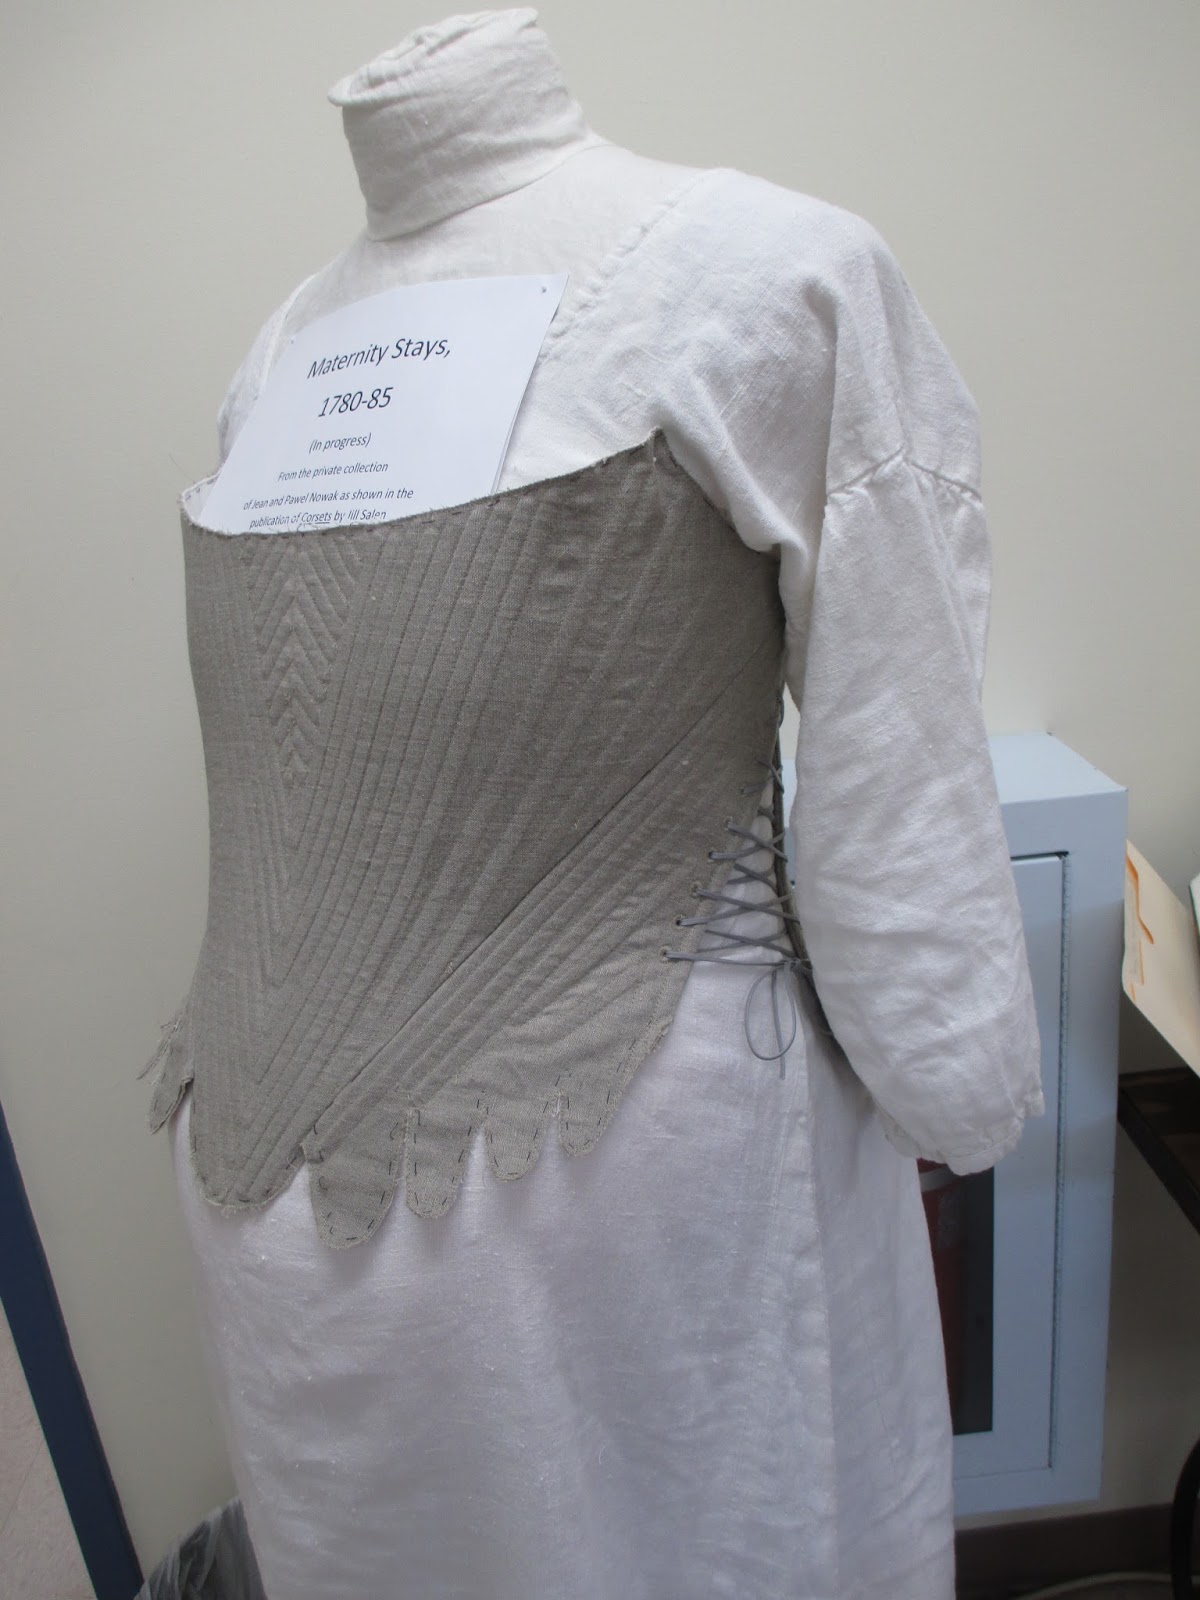 A Sartorial Statement: 18th Century Maternity Plans